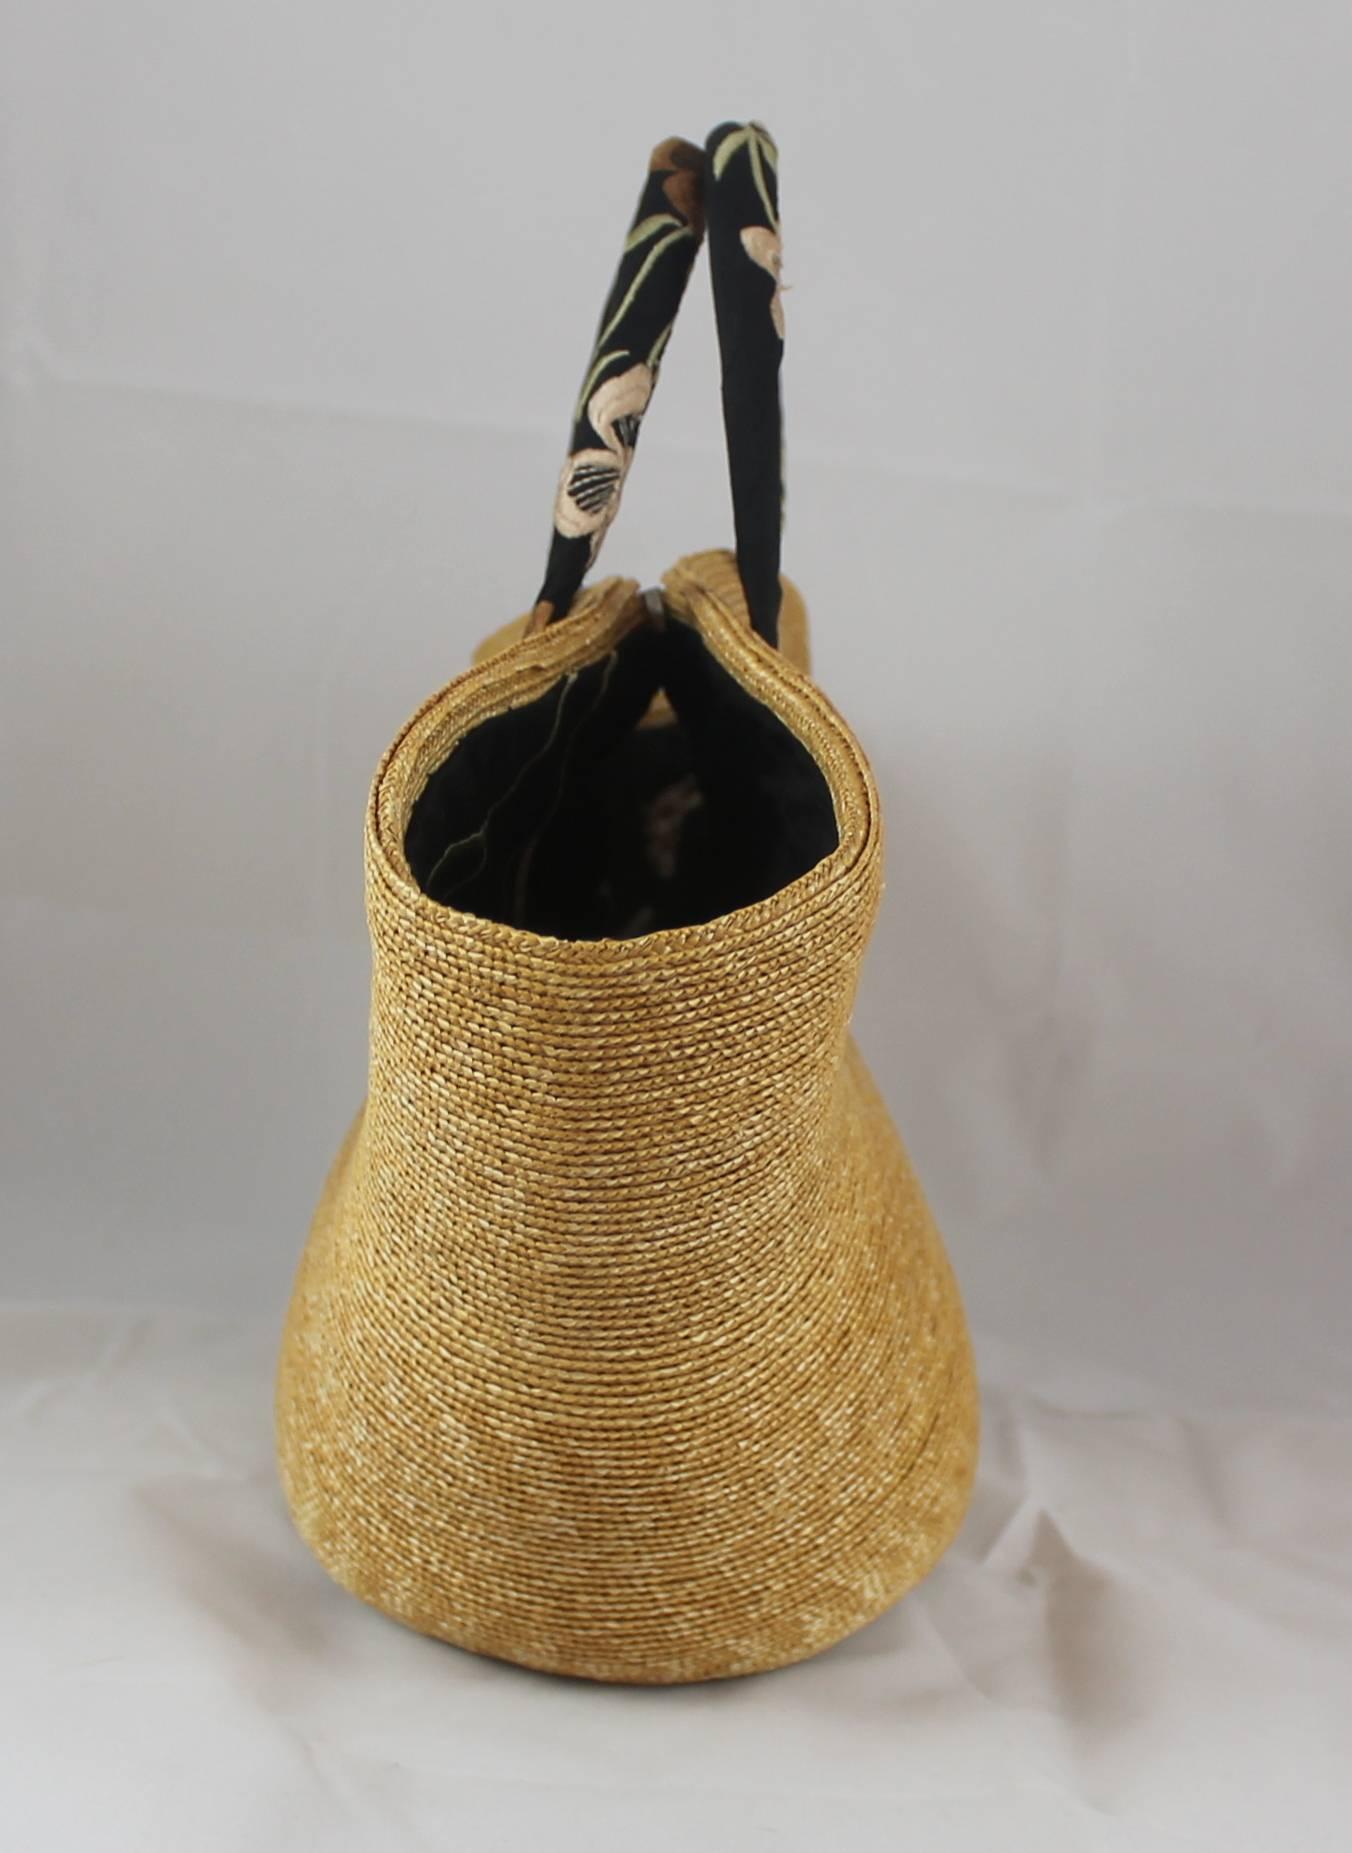 Brown Suzanne Couture Millinery Small Tan Woven Straw Bag with Floral Handles